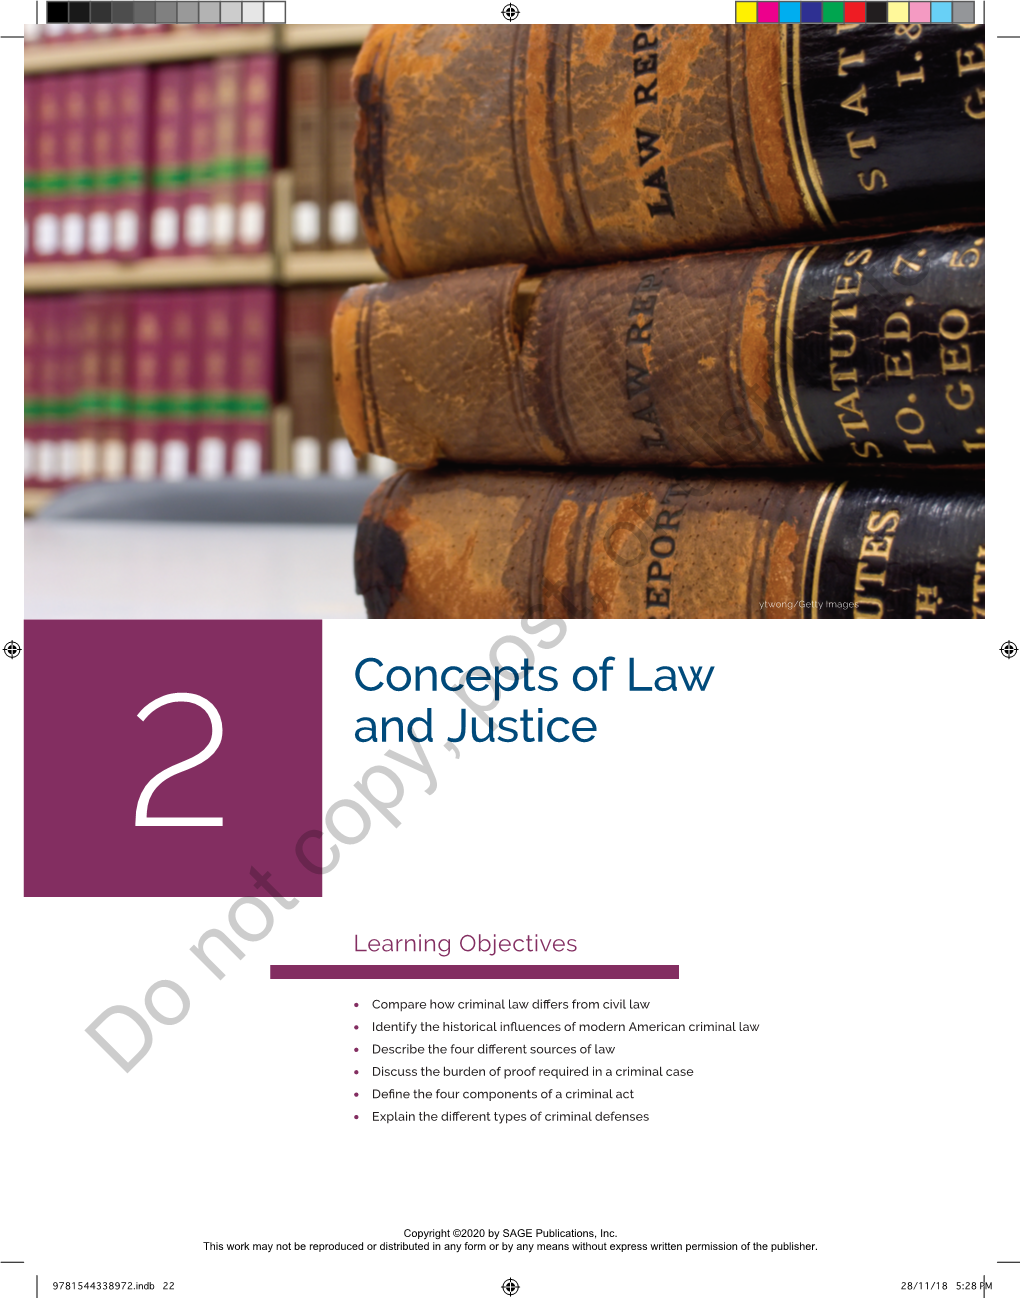 Chapter 2: Concepts of Law and Justice